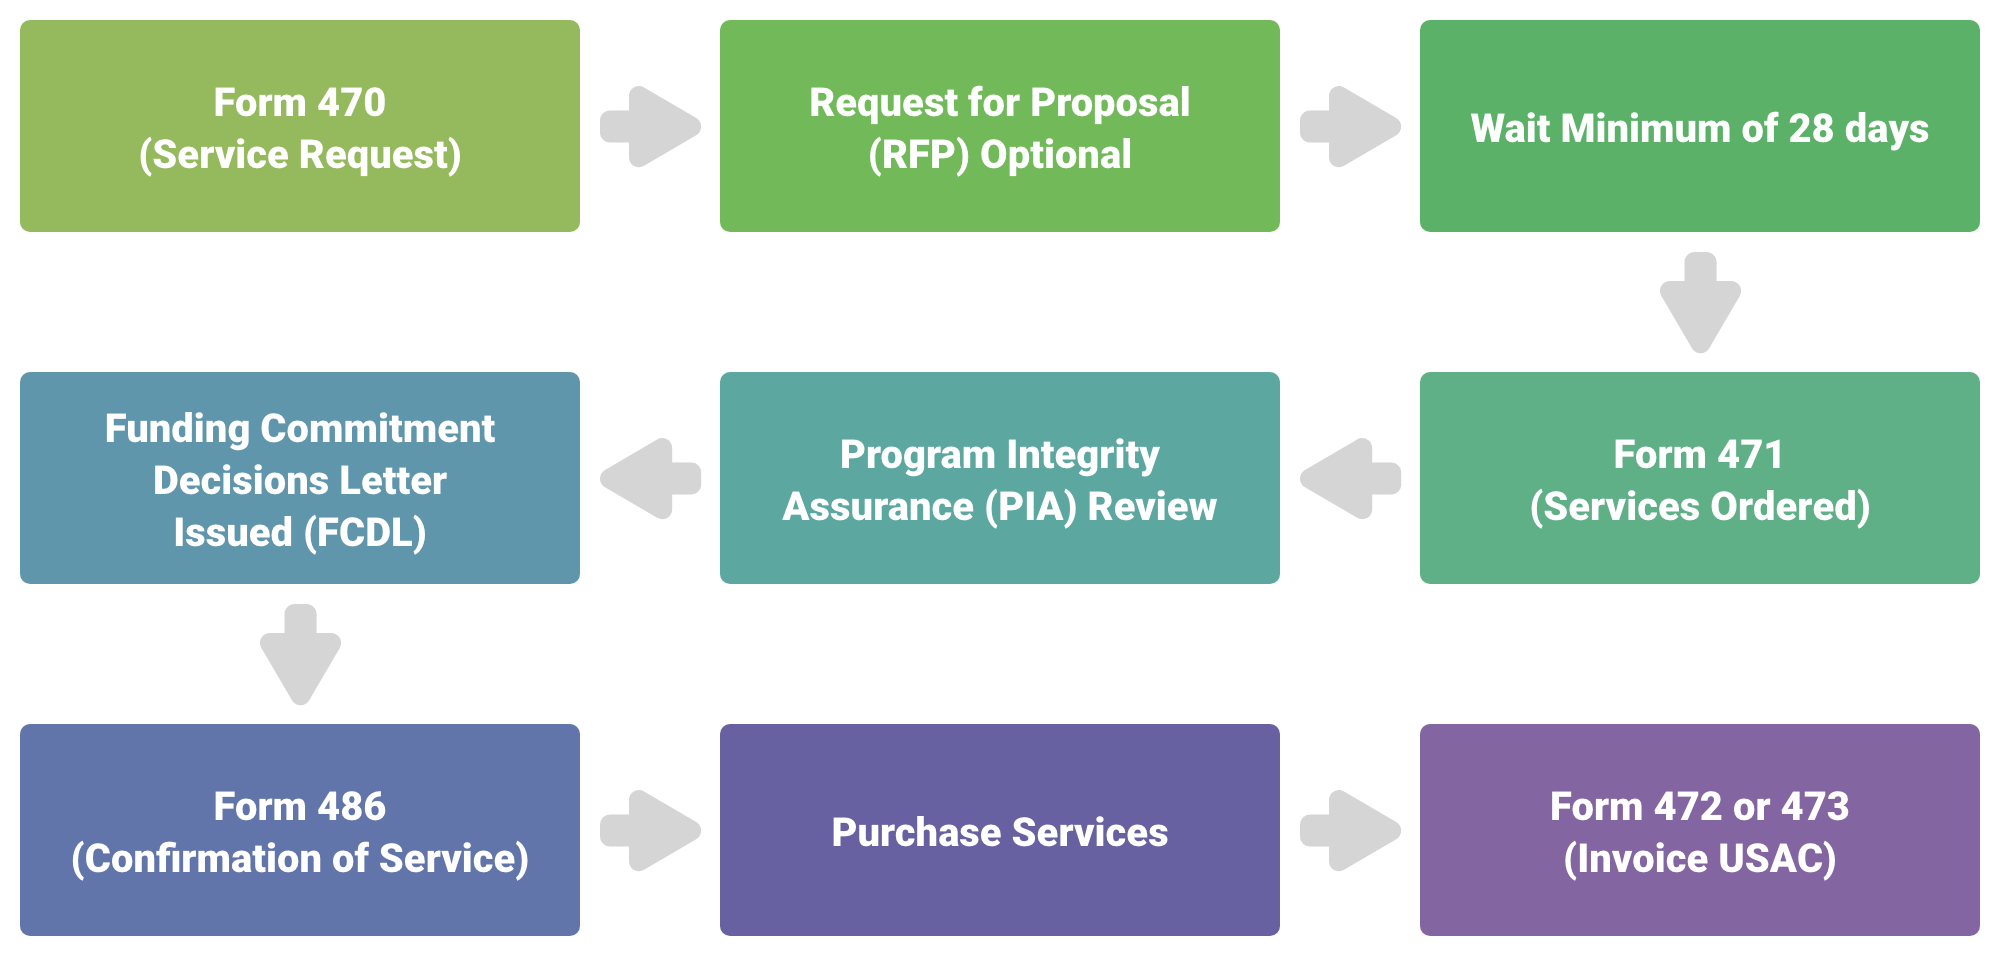 Flow chart showing how E-rate process works as described in detail below.